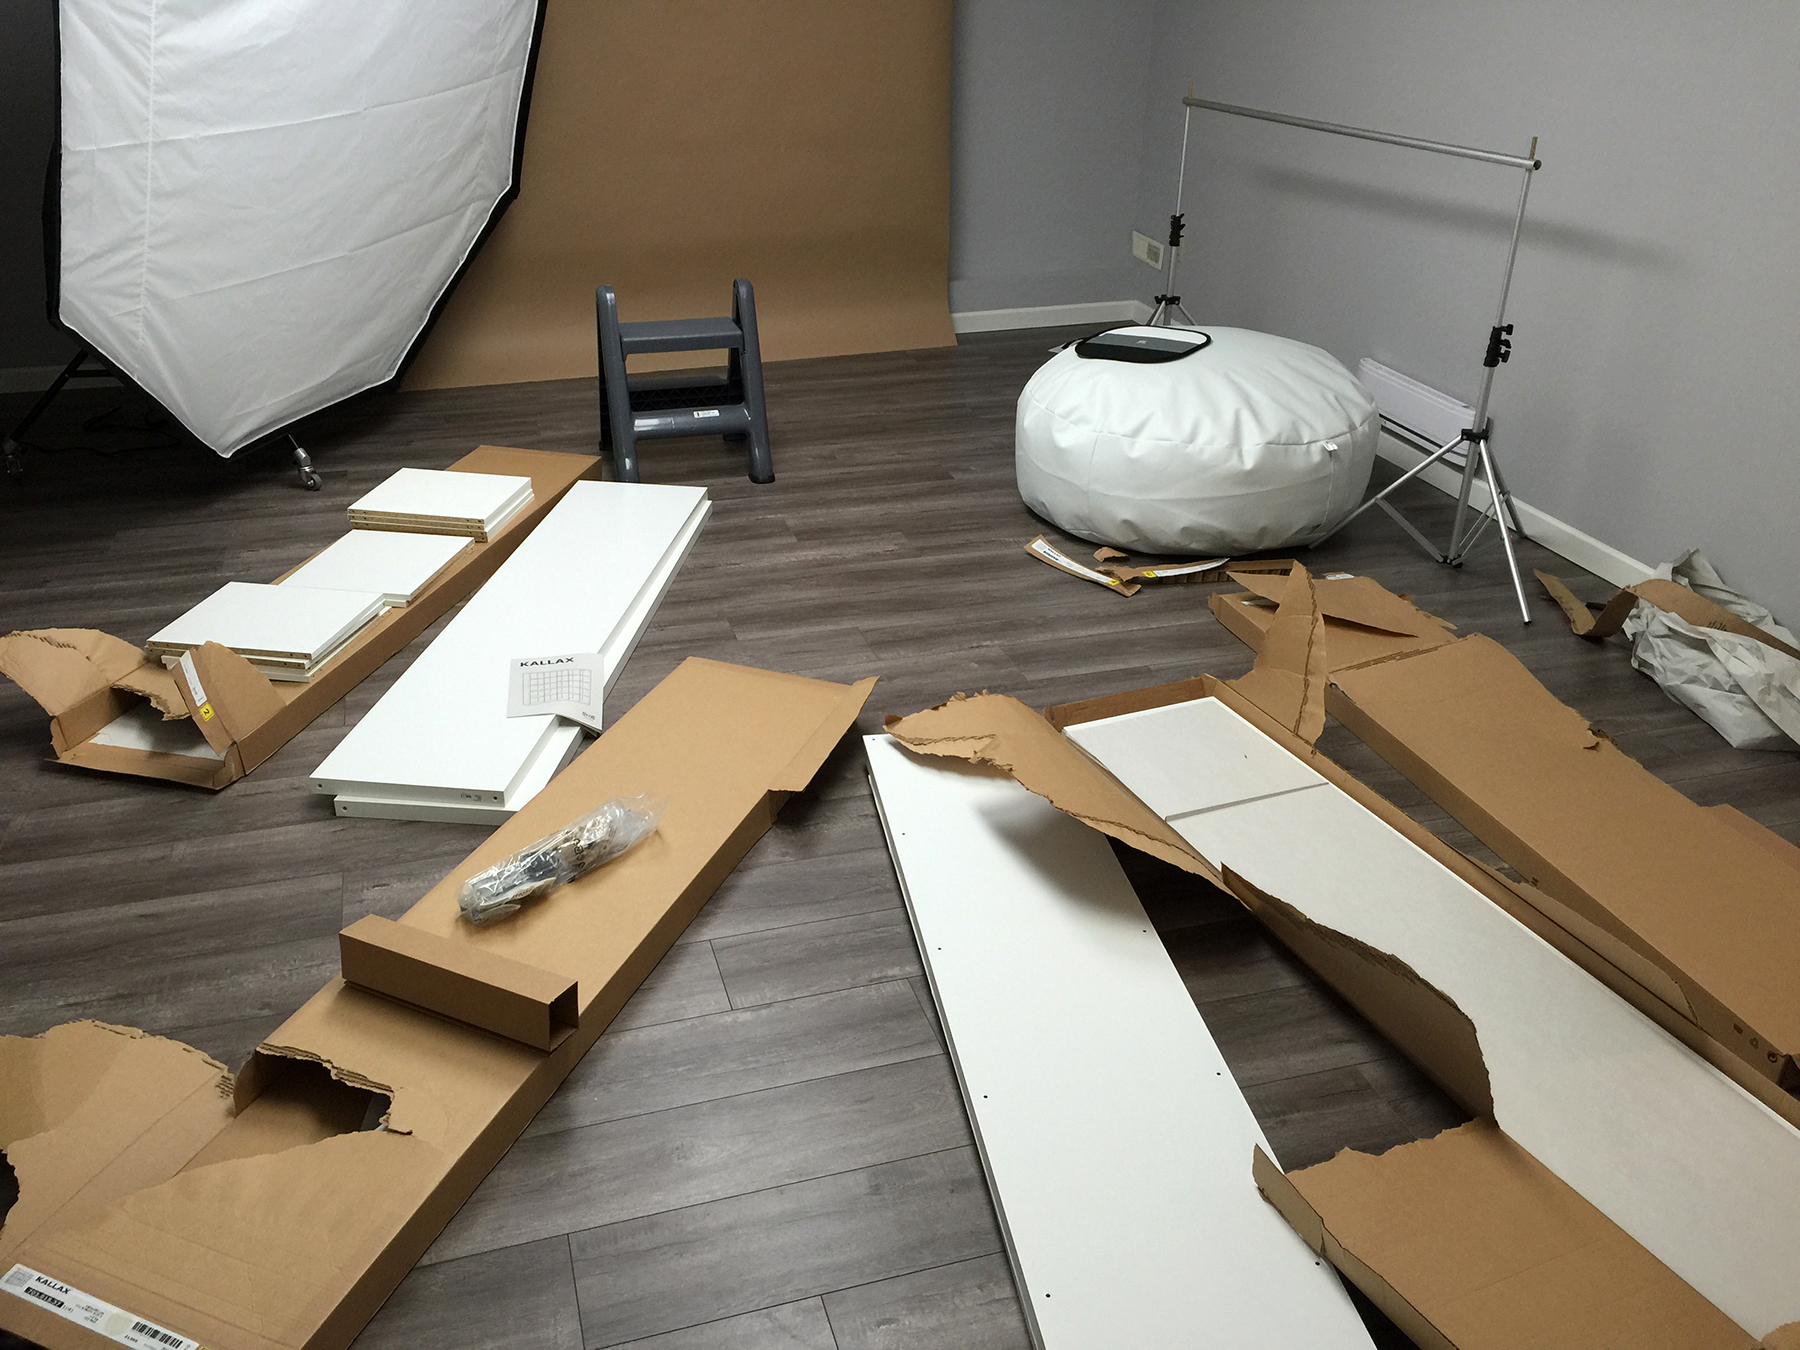 photography studio 2016, Vancouver bc full of boxes